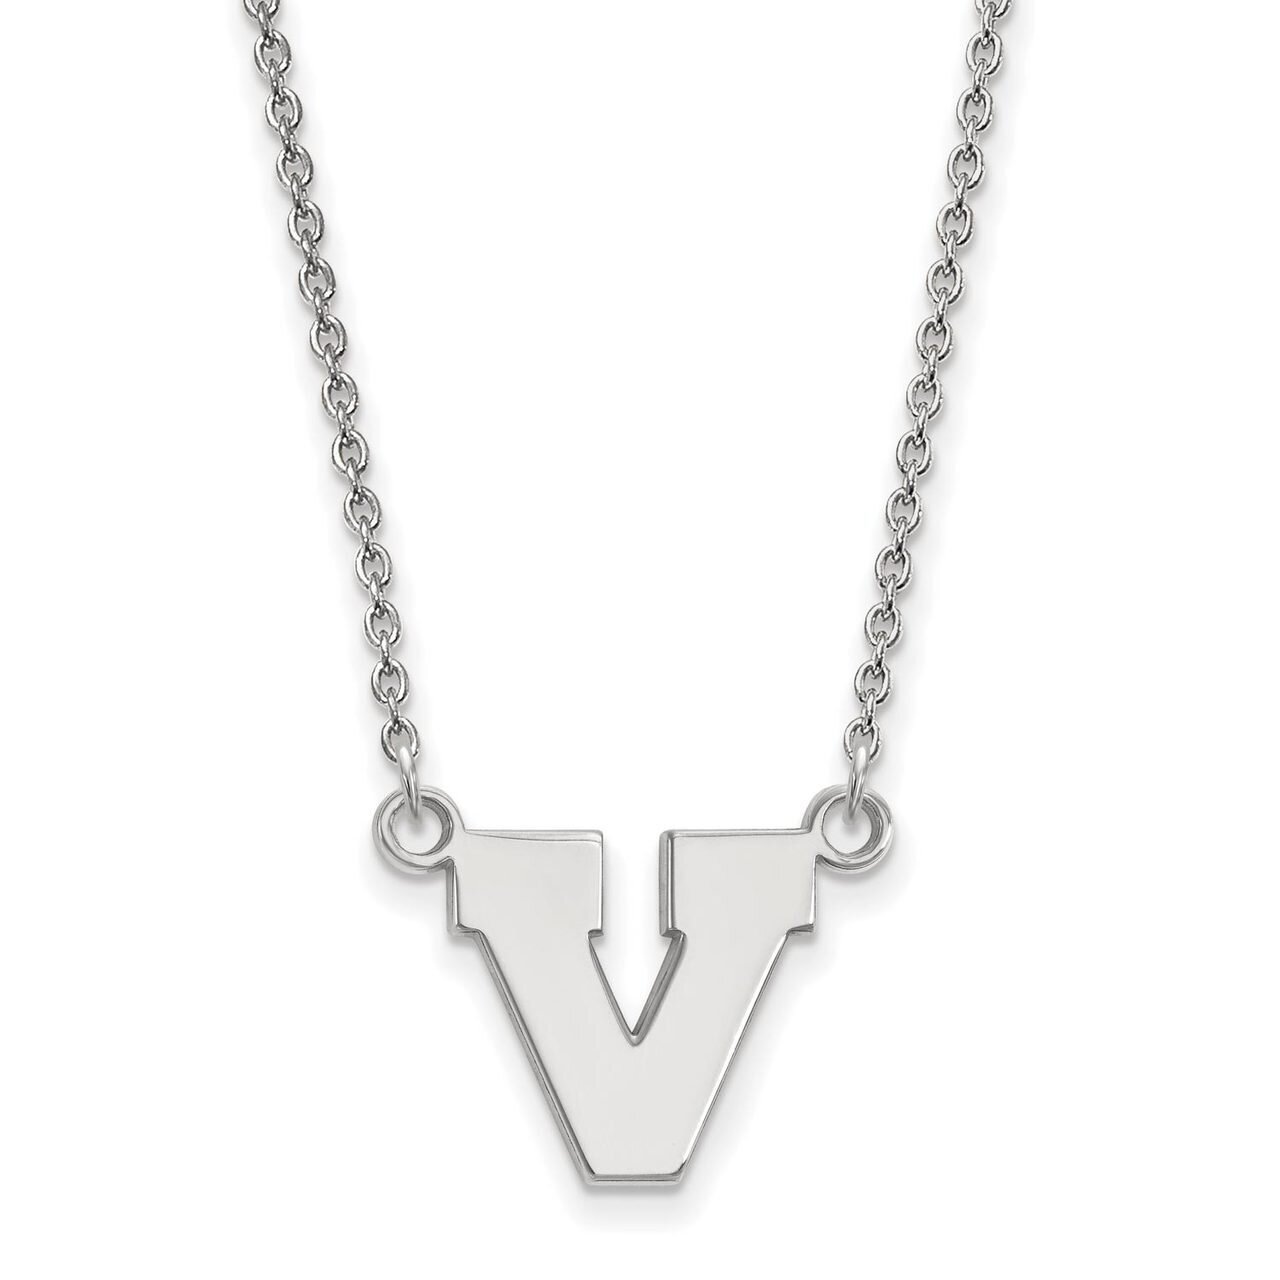 University of Virginia Small Pendant with Chain Necklace 10k White Gold 1W054UVA-18